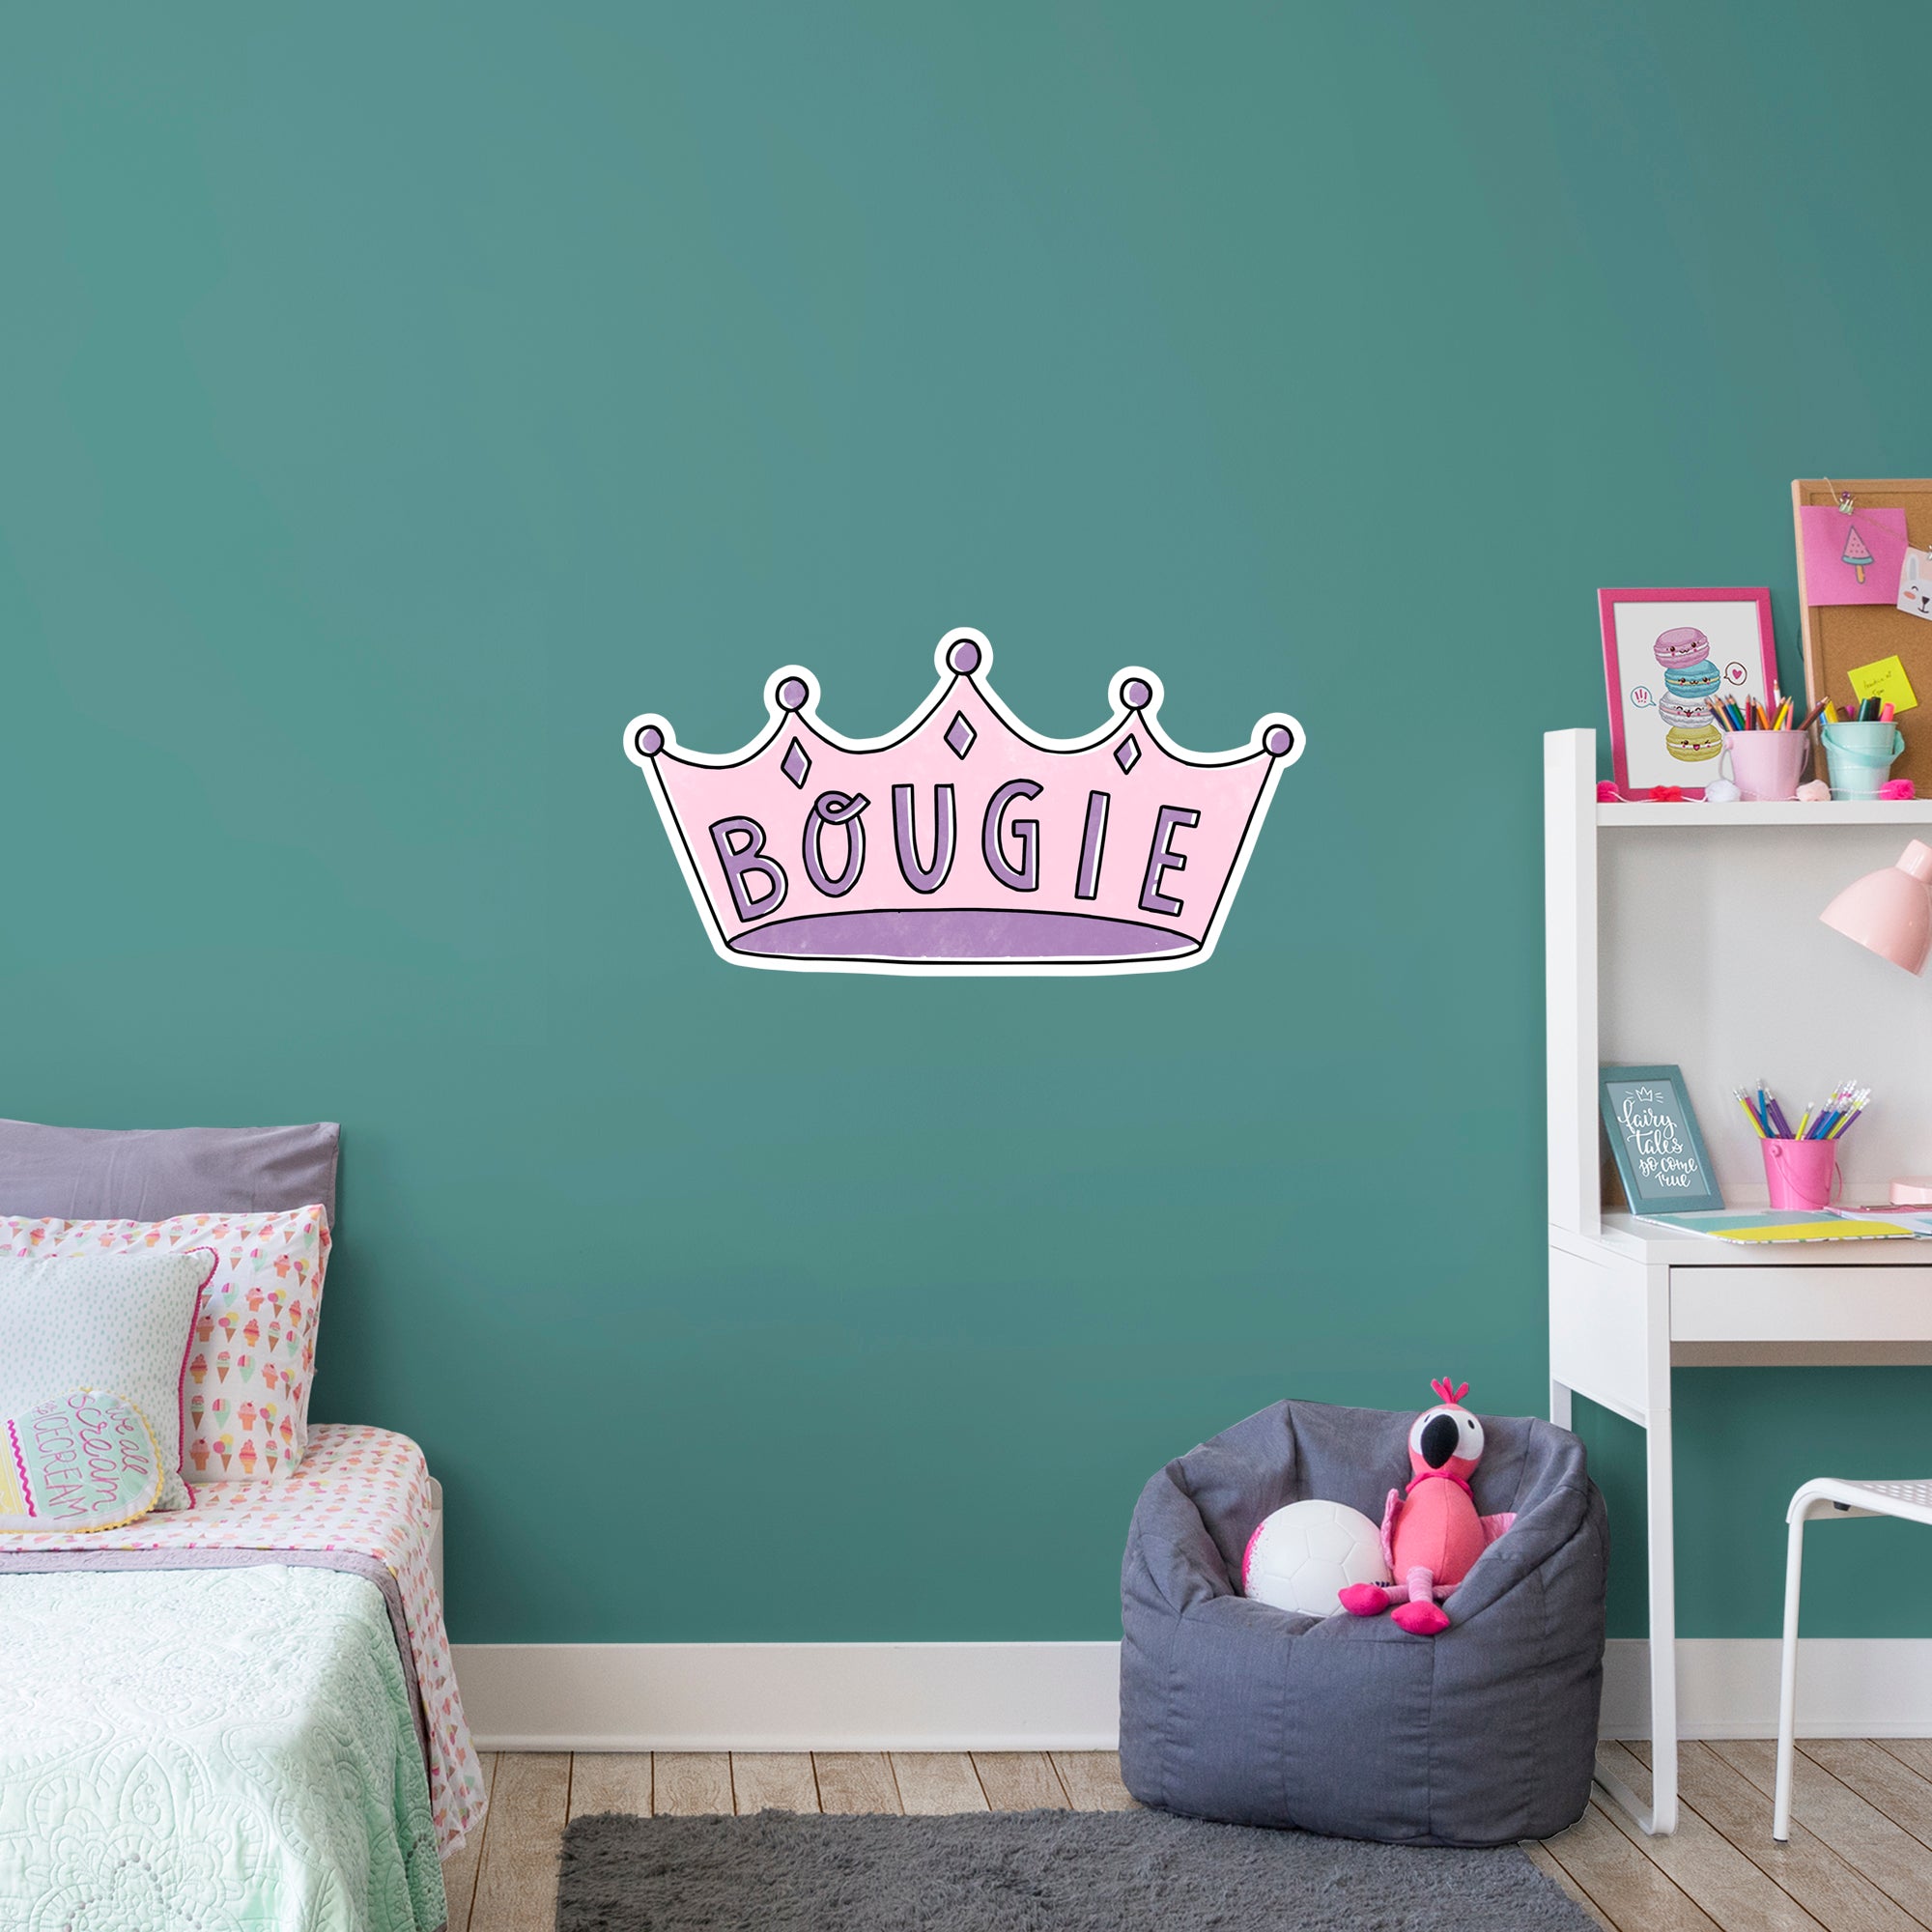 Bougie Crown - Officially Licensed Big Moods Removable Wall Decal XL by Fathead | Vinyl